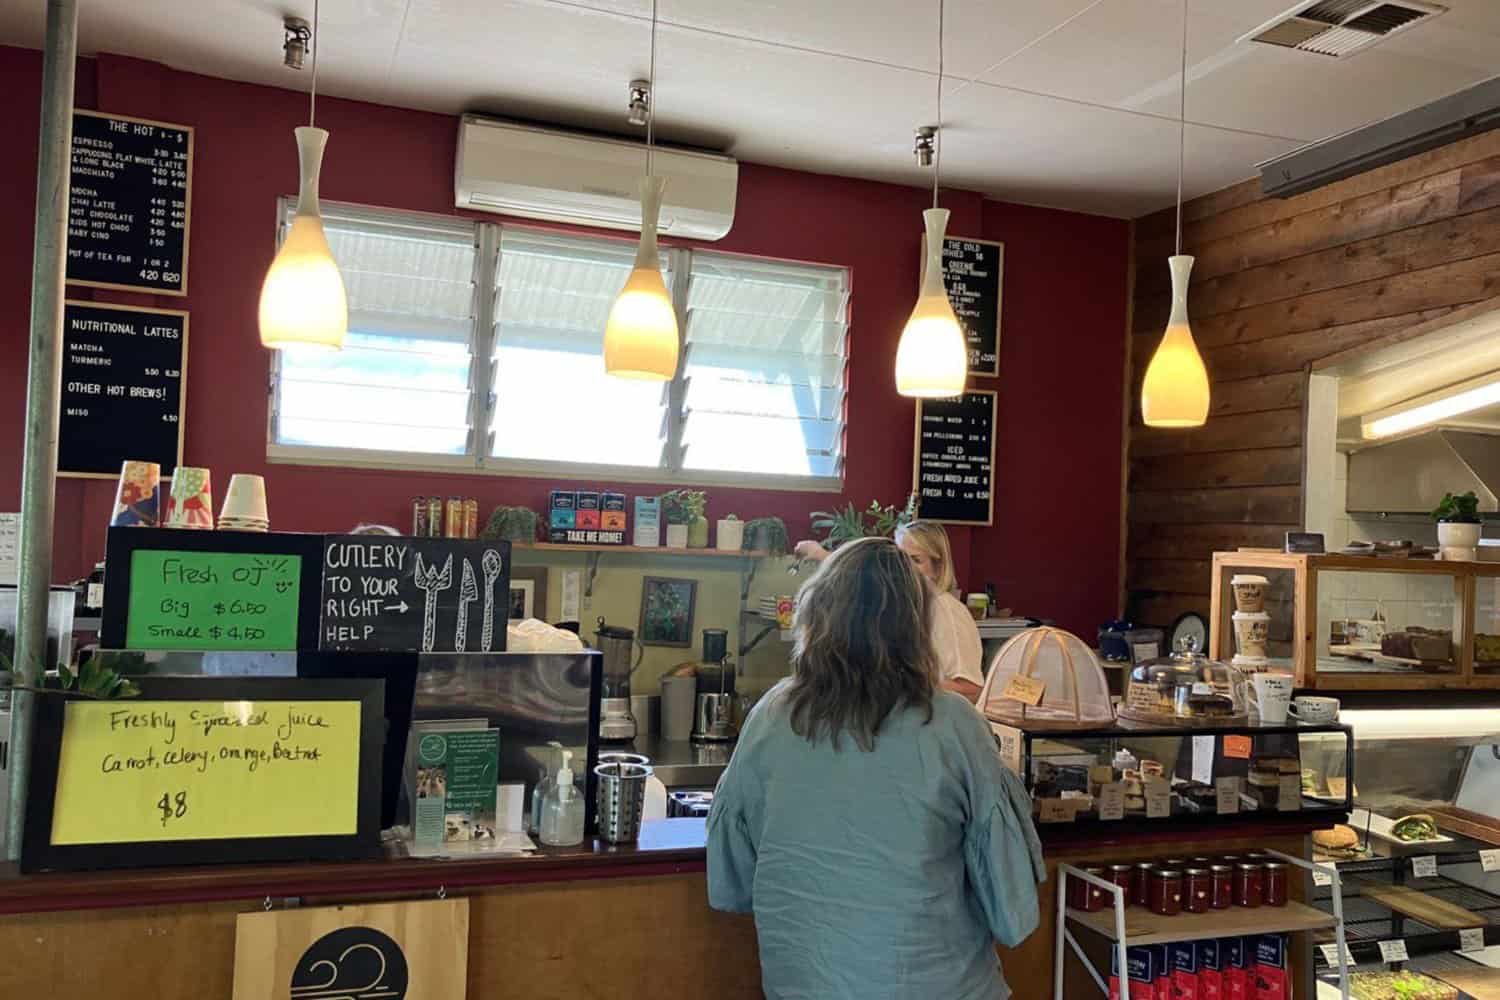 A bustling coffee shop in Margaret River, featuring a lady ordering the best coffee from the counter, an appetizing display of cakes and sandwiches, informative signs on the wall, and a professional coffee machine ready to brew the perfect cup.